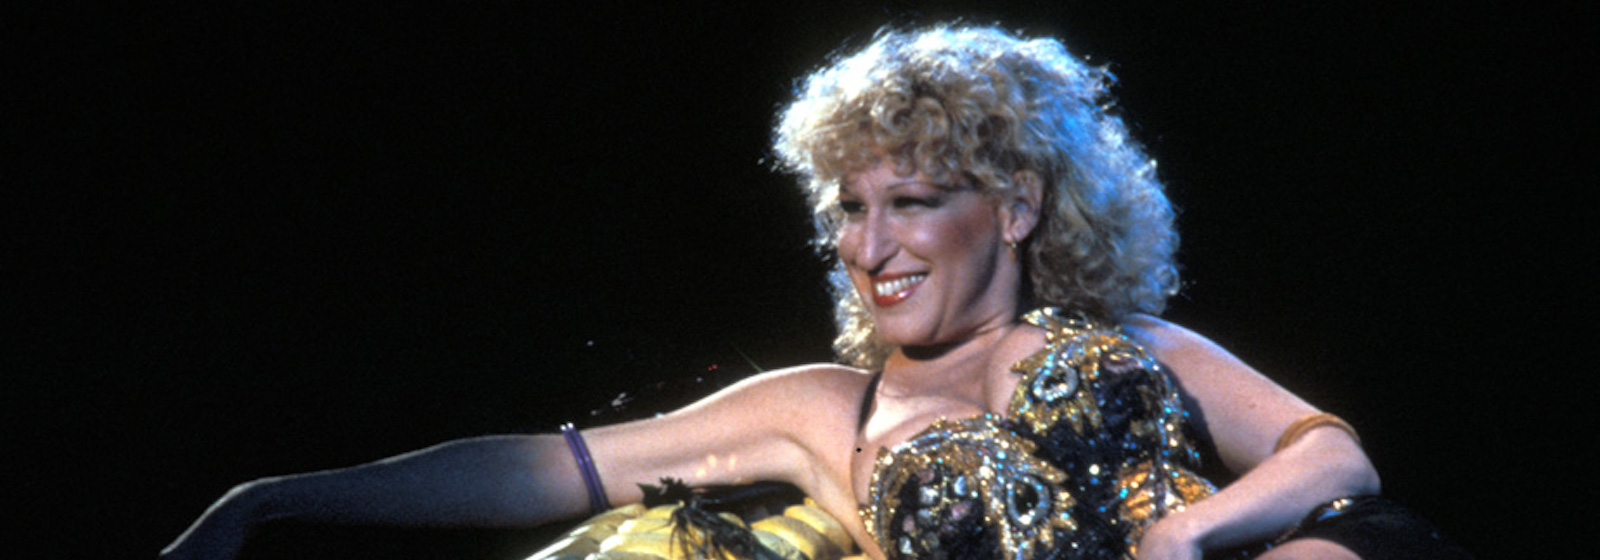 Bette Midler, wearing a a sequin and gem covered bodice, smiles as she leans against an enormous prop ear of corn on stage in the concert film Divine Madness